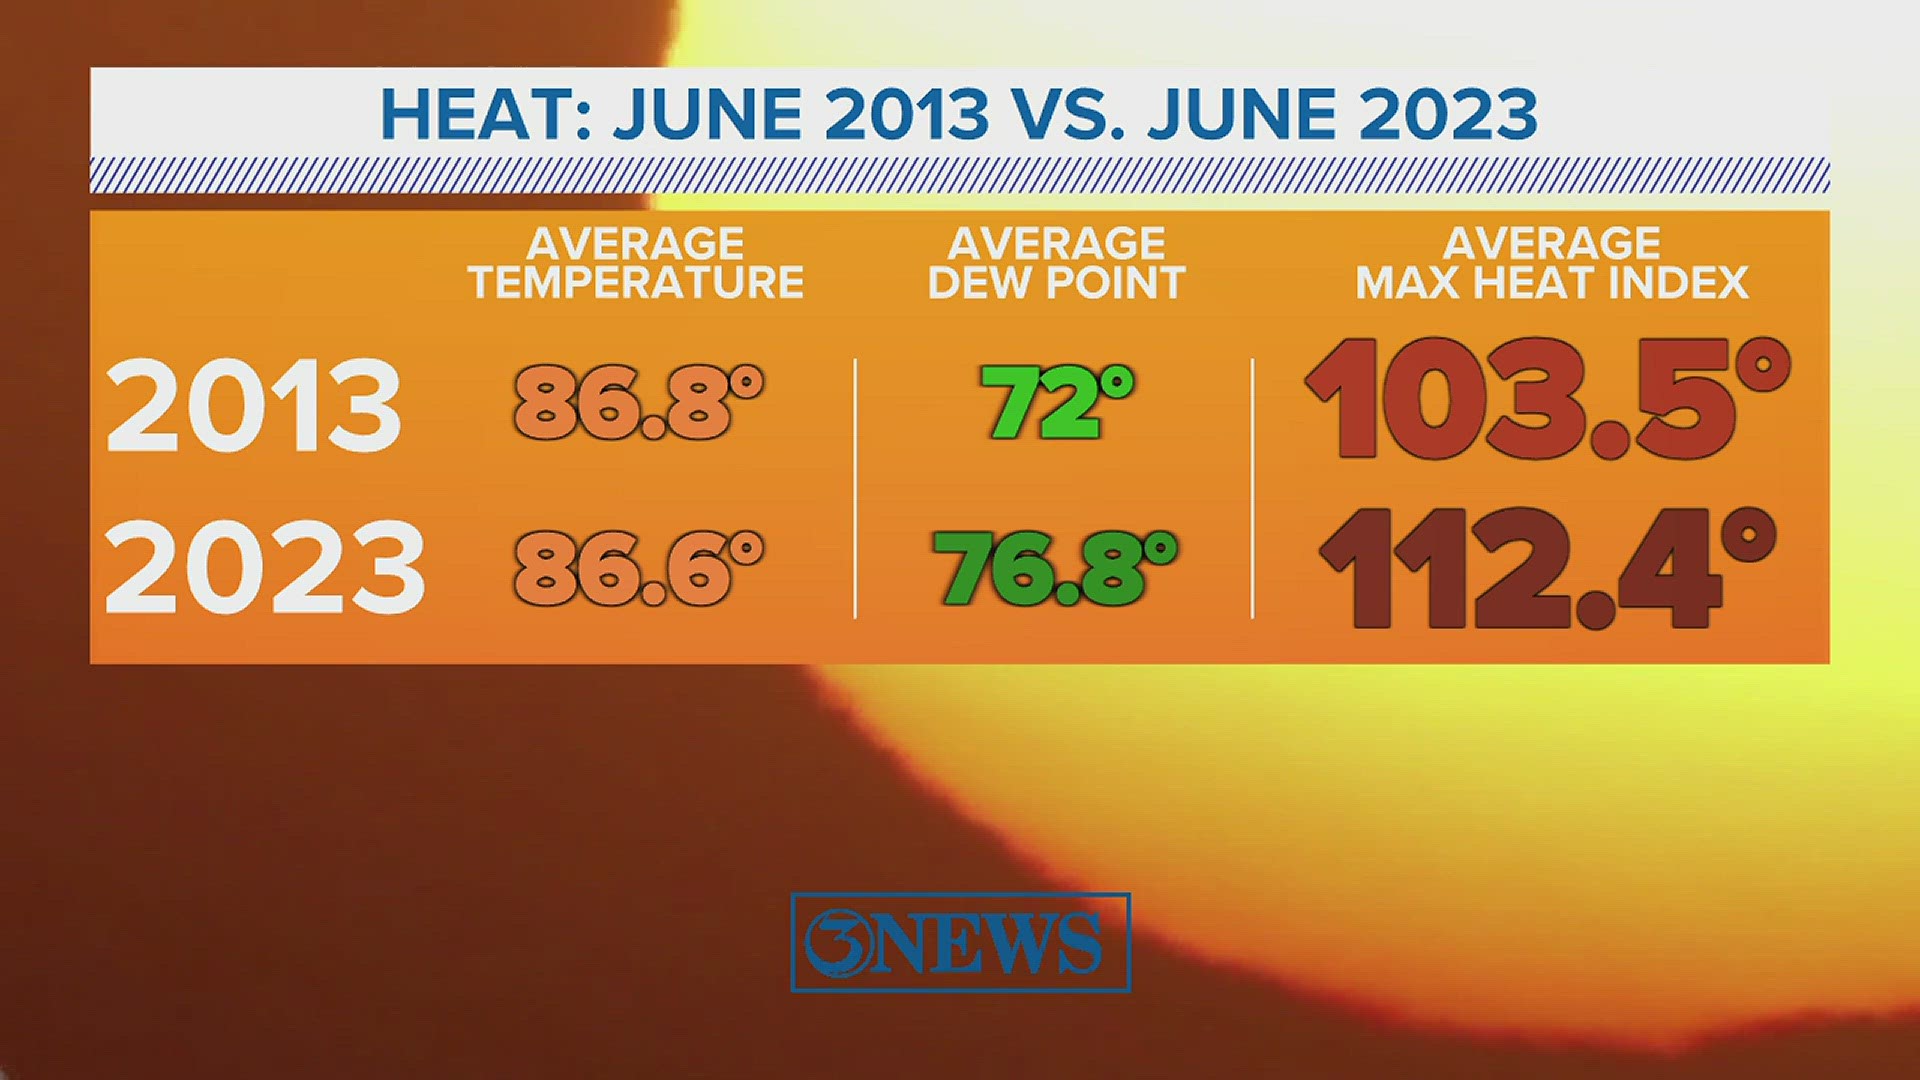 June 2023 has been hot and the average temperature is rivaling June 2013 for the hottest June in Corpus Christi. But 2023 has actually felt nearly 10 degrees hotter.